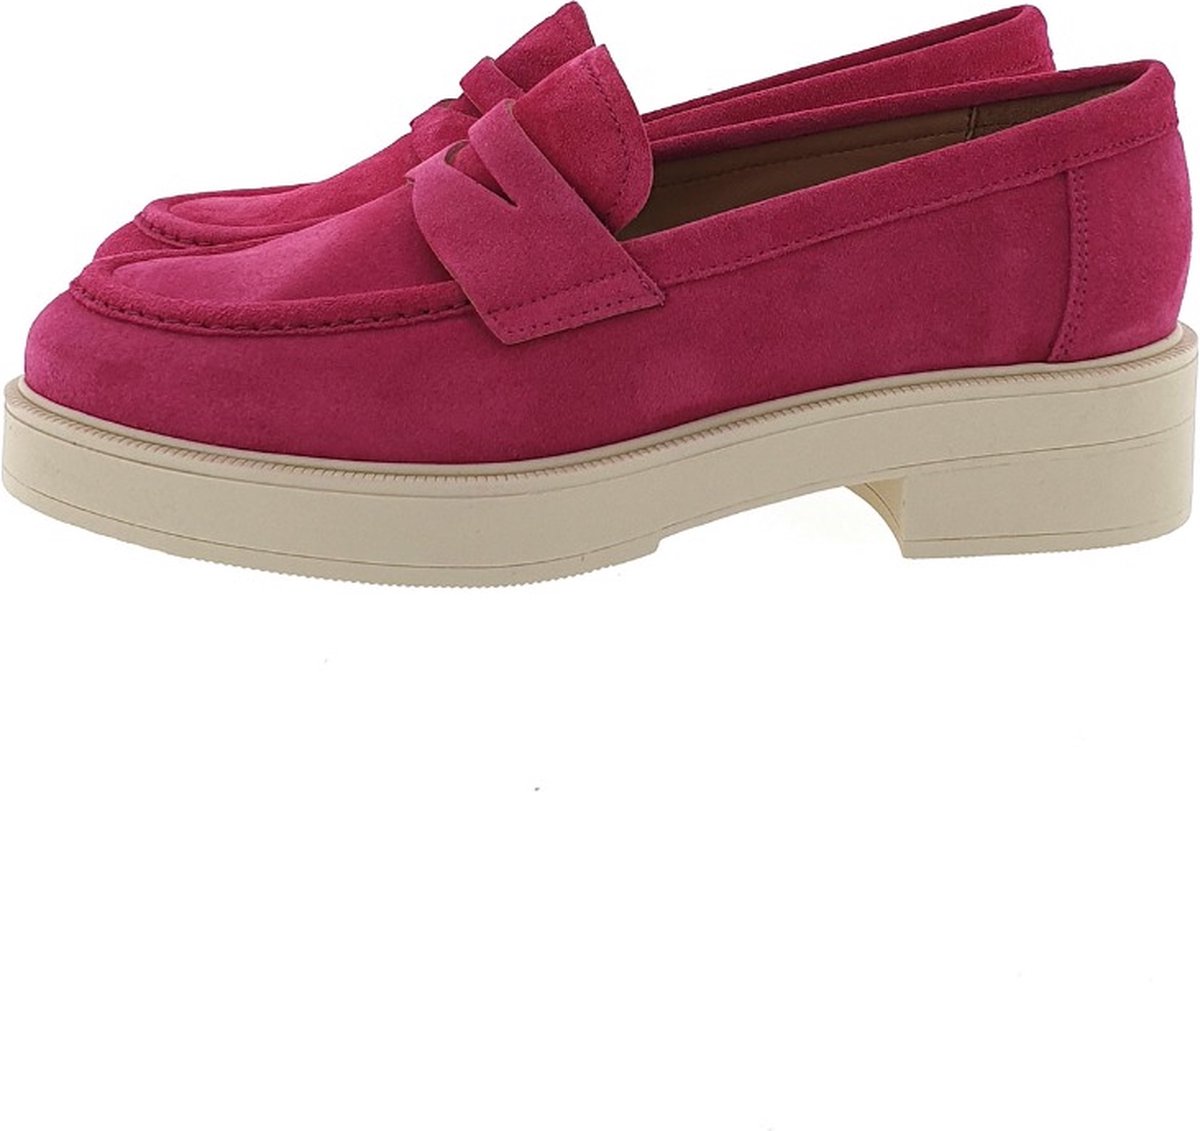 CTWLK London loafer fuxia, 40 / 6.5